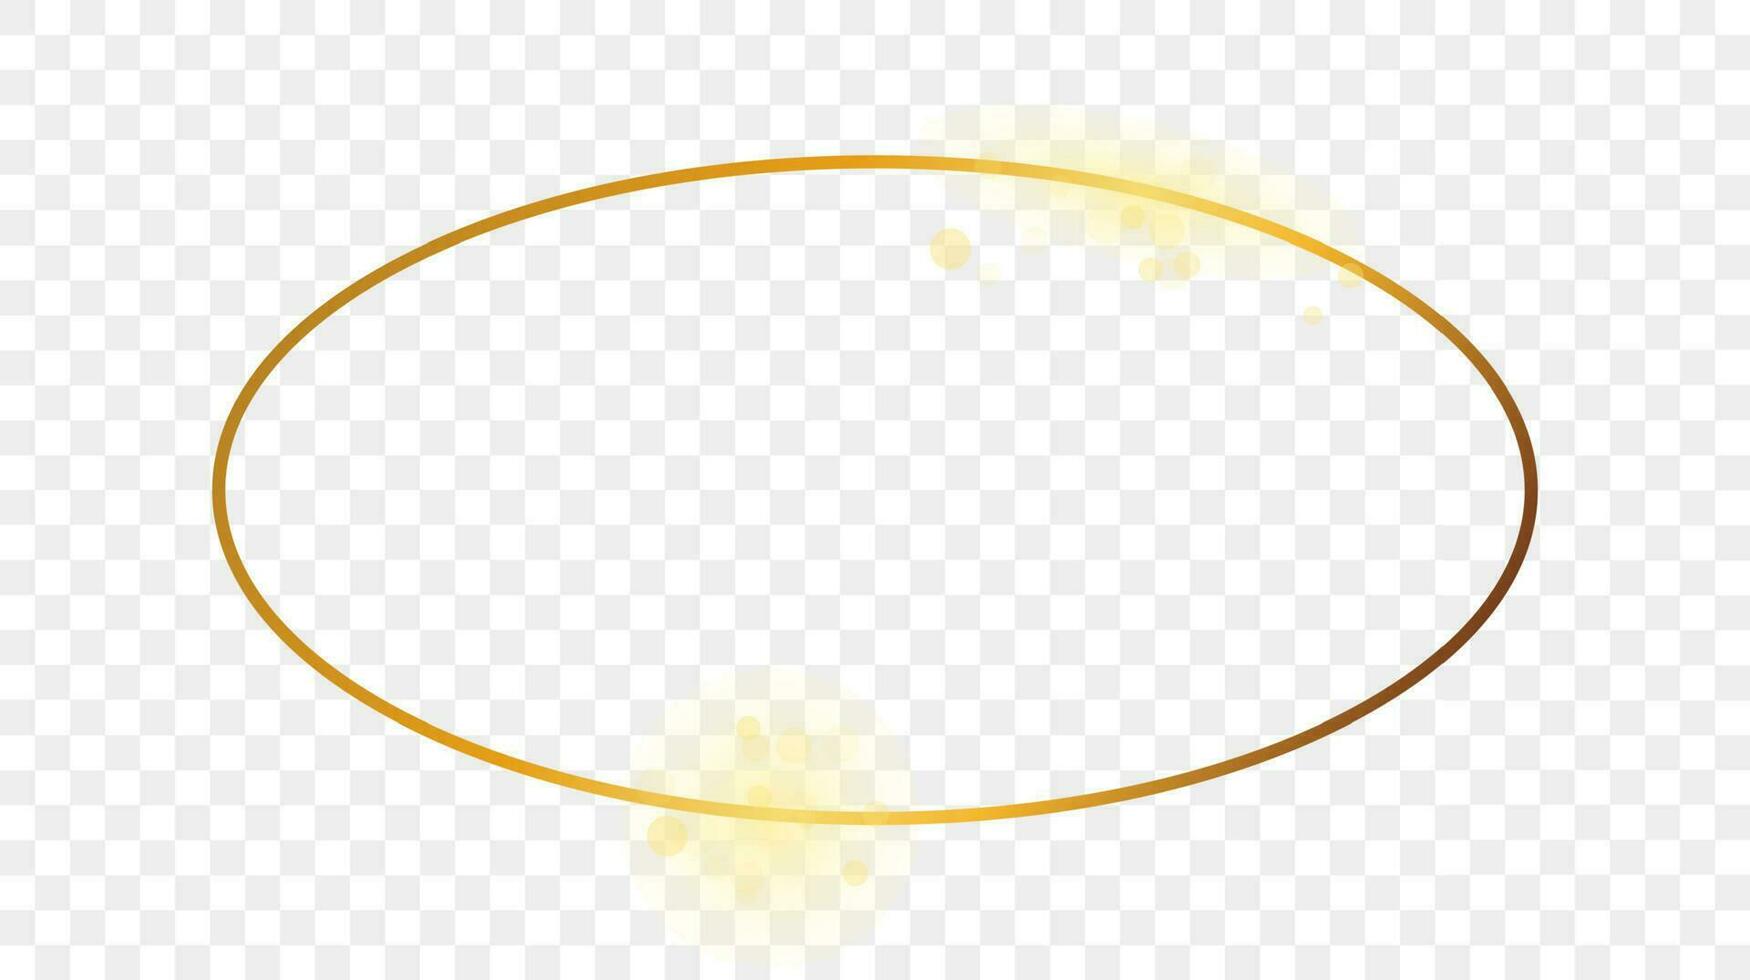 Gold glowing oval shape frame isolated on background. Shiny frame with glowing effects. Vector illustration.